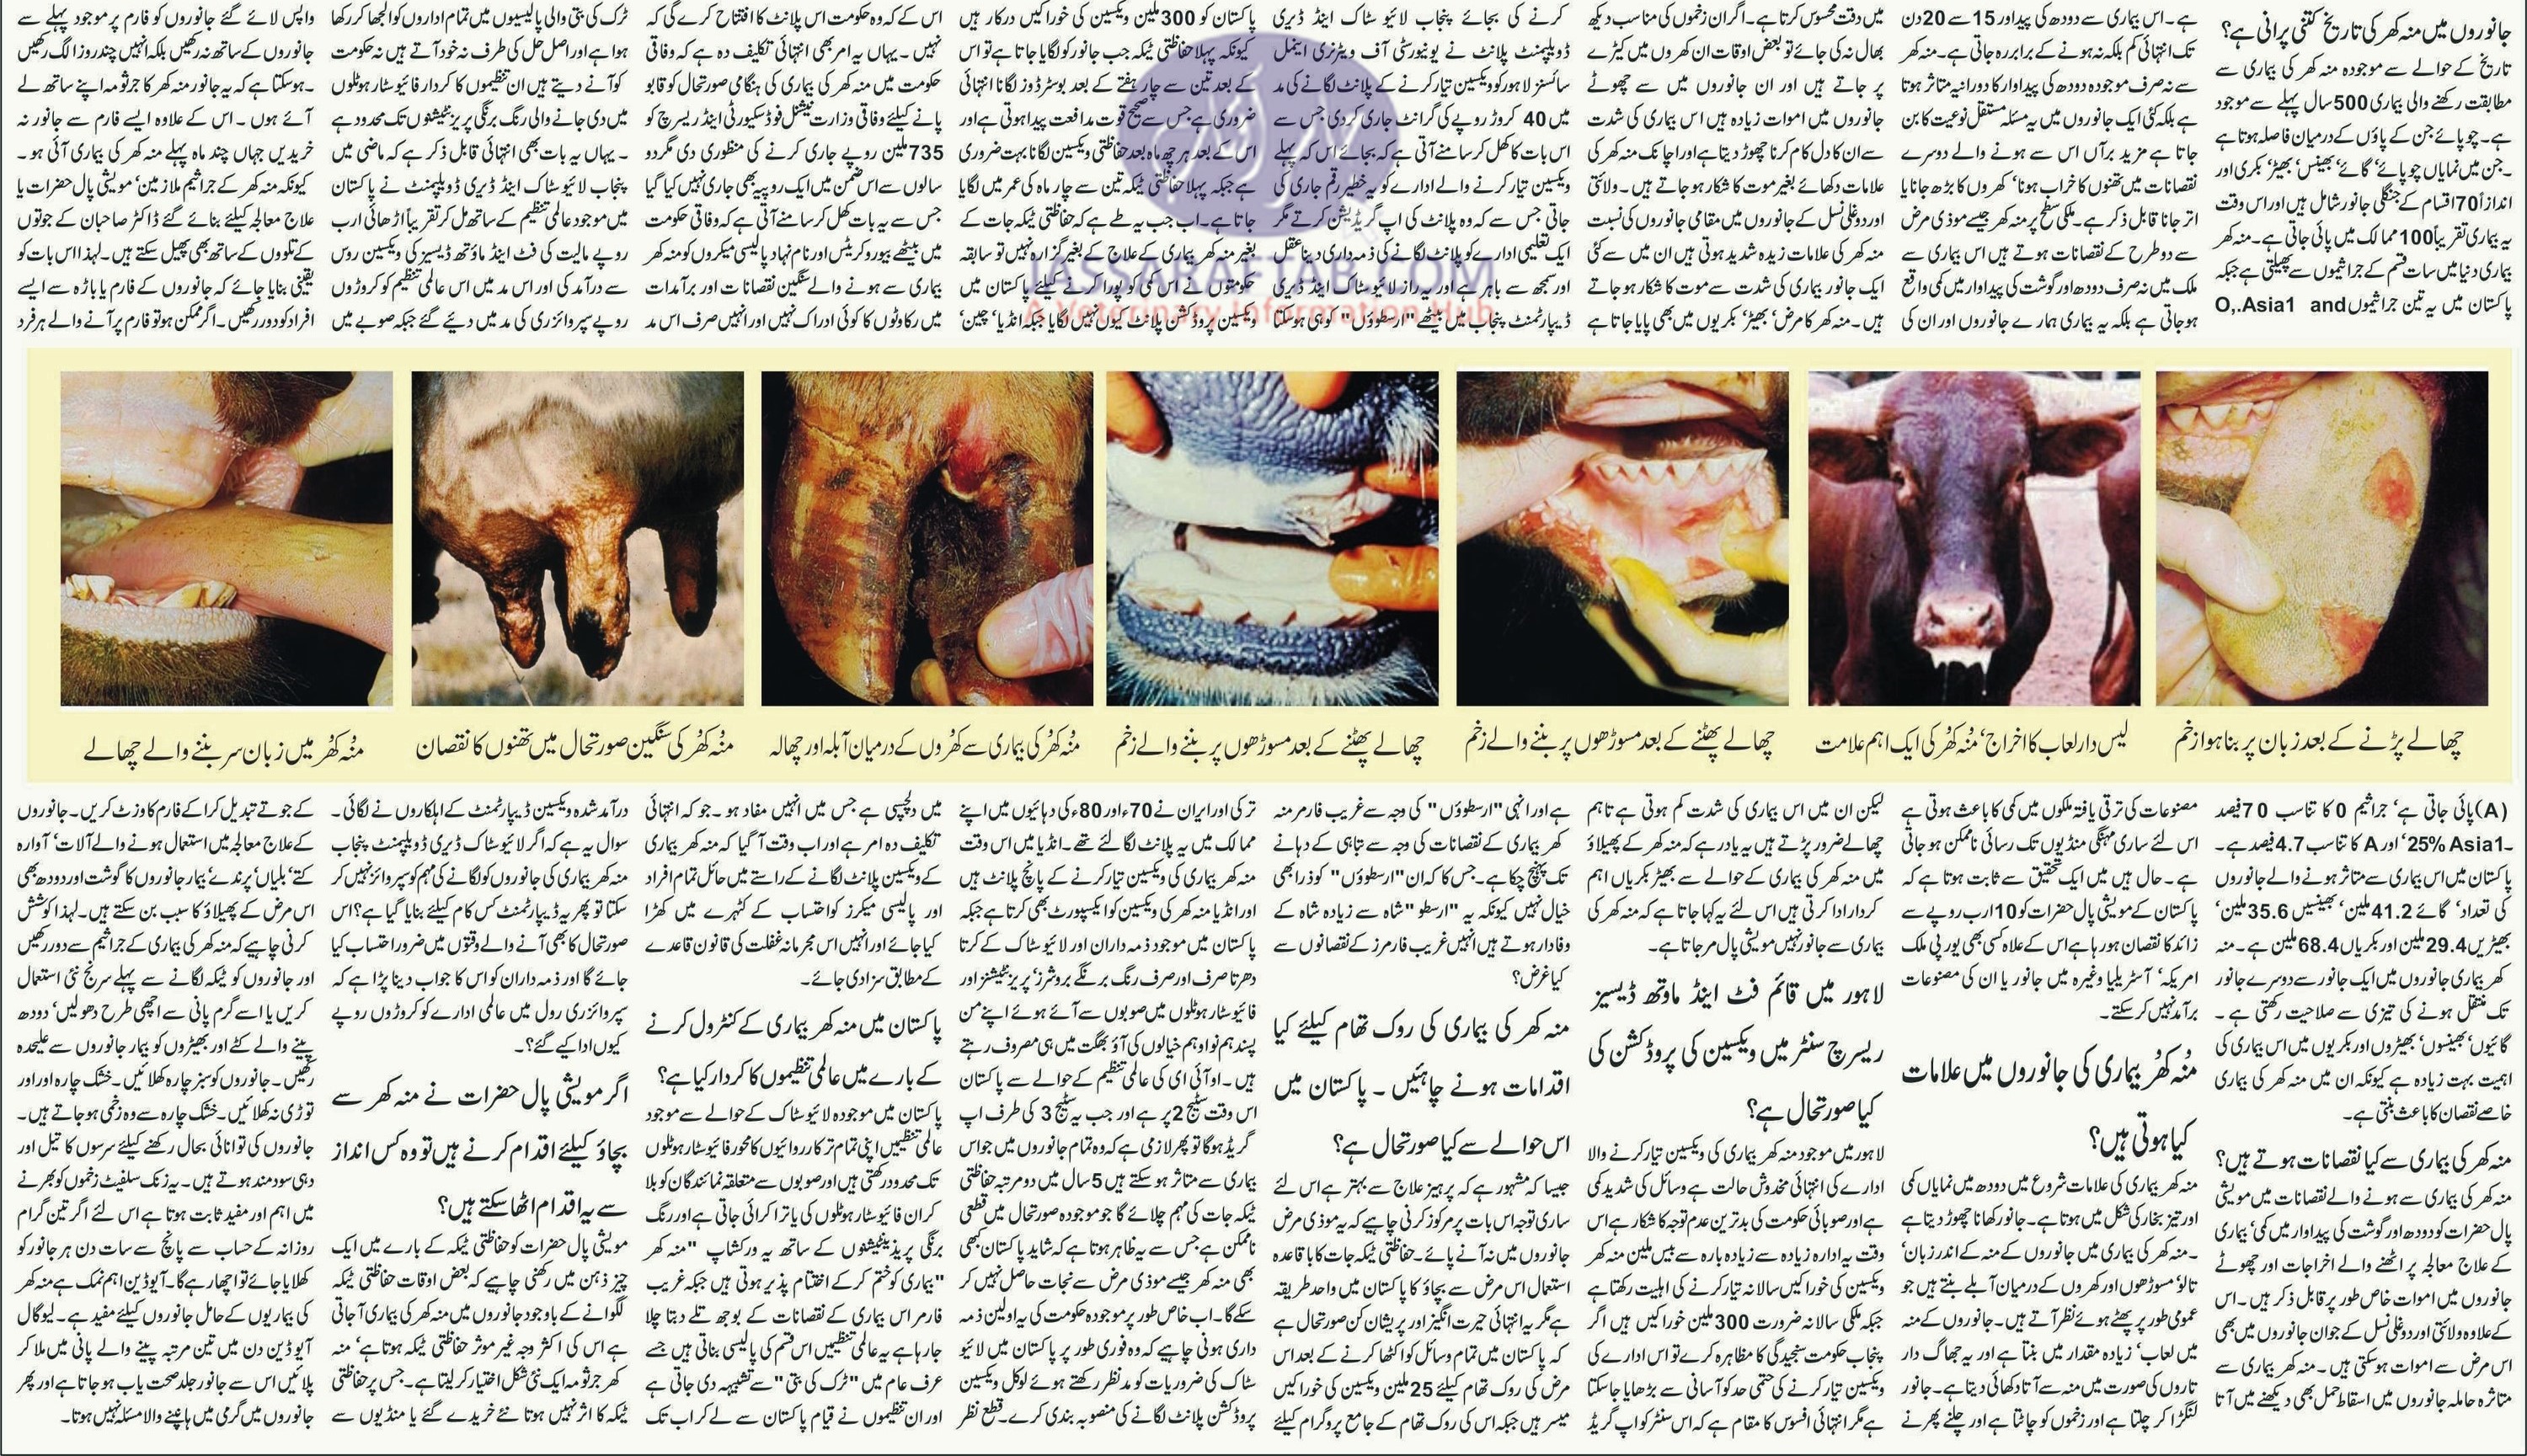 Foot and Mouth Diseases Vaccine & FMD Control in Pakistan 